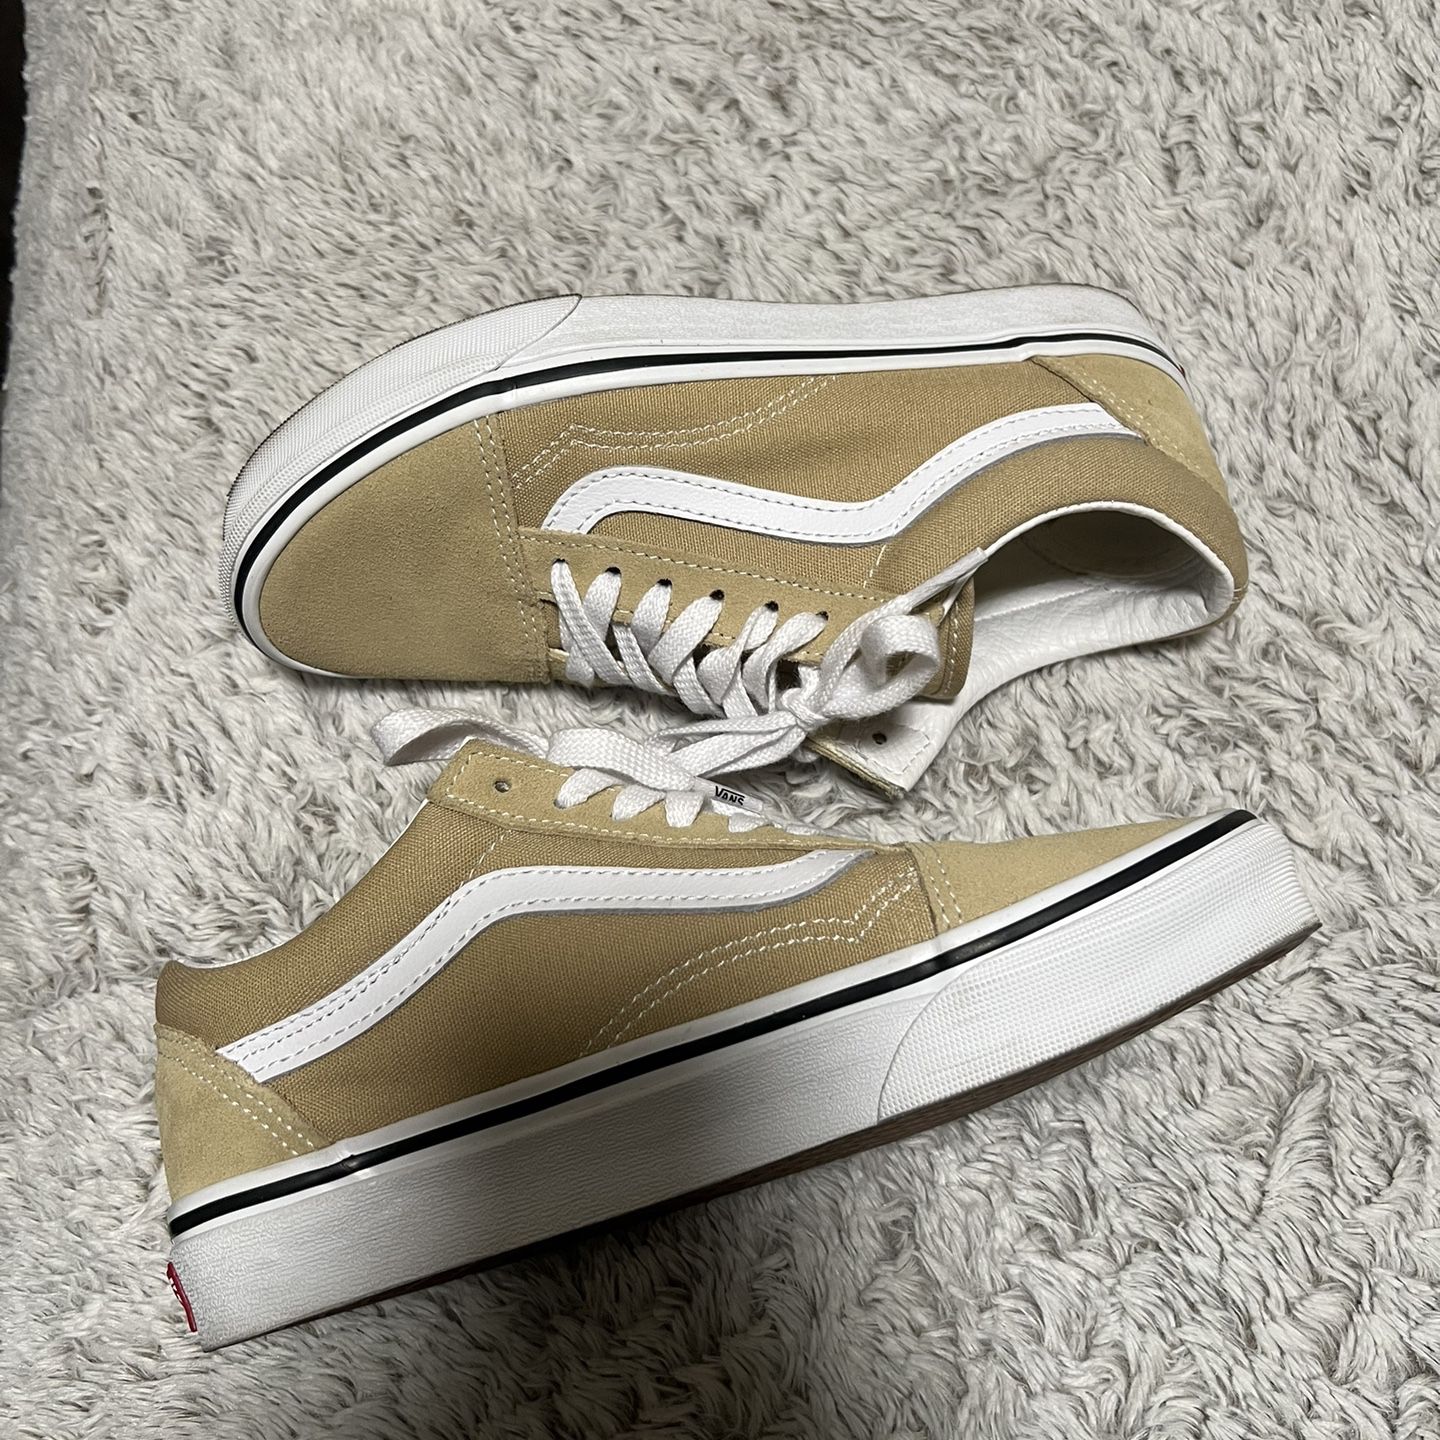 Vans Size 6 for Sale in Claremont, CA - OfferUp